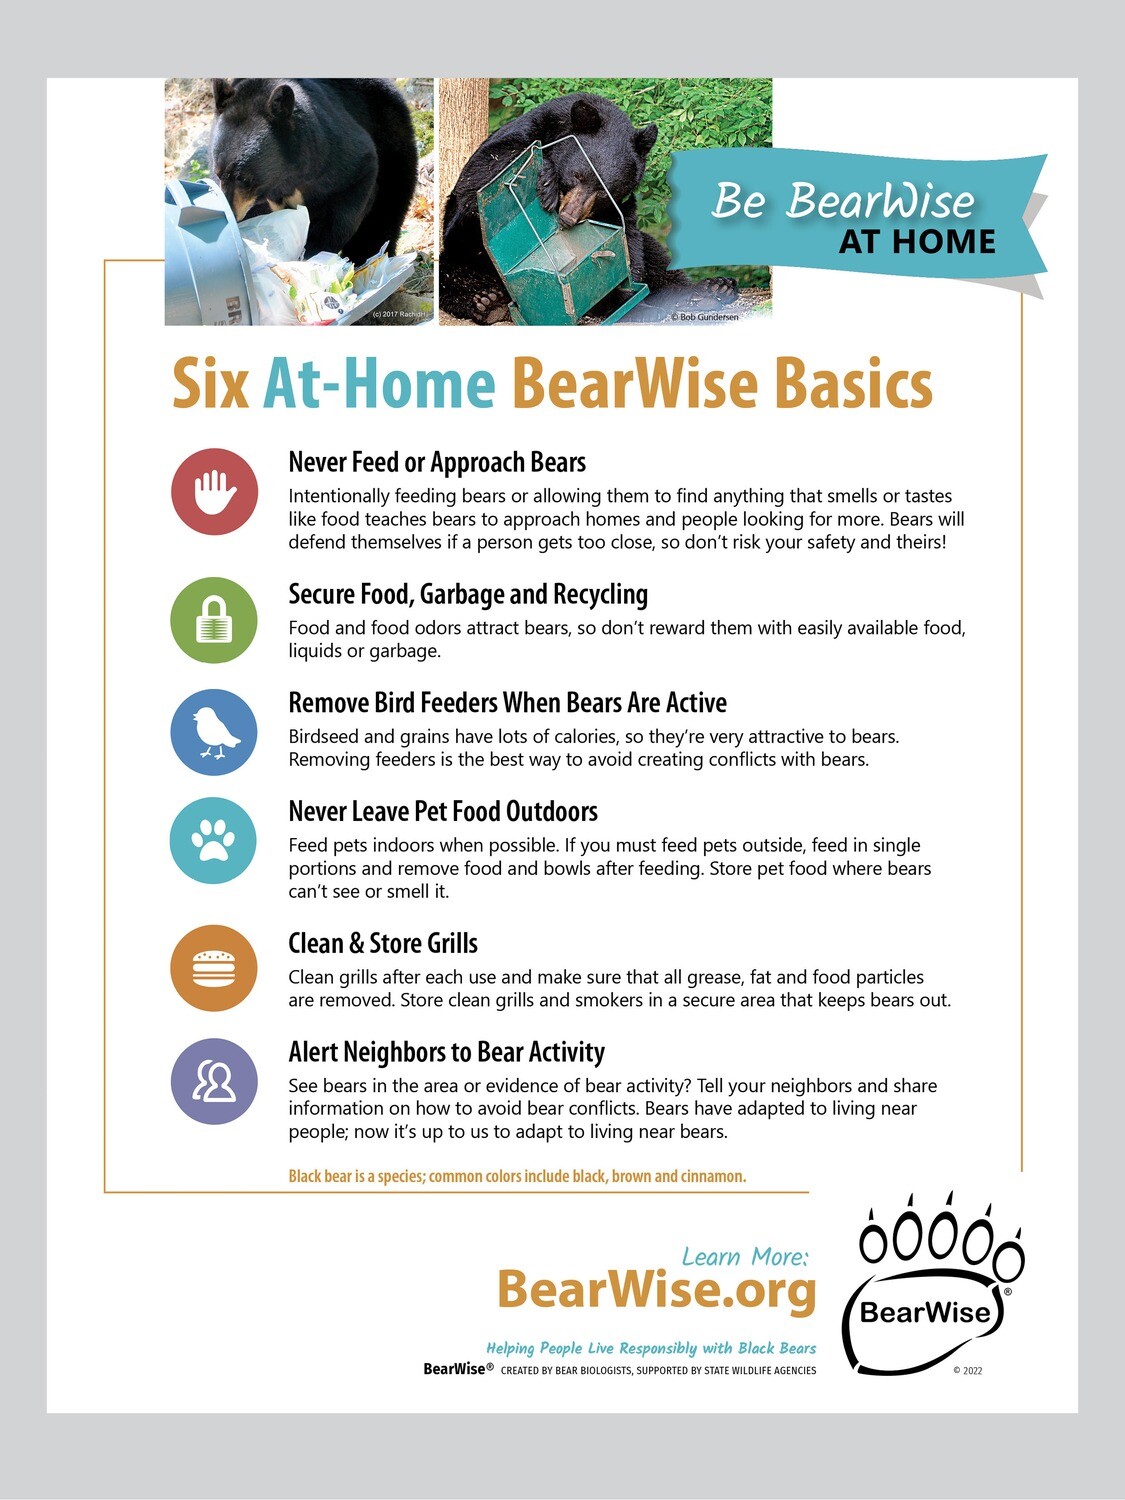 At-Home BearWise Basics Flyer